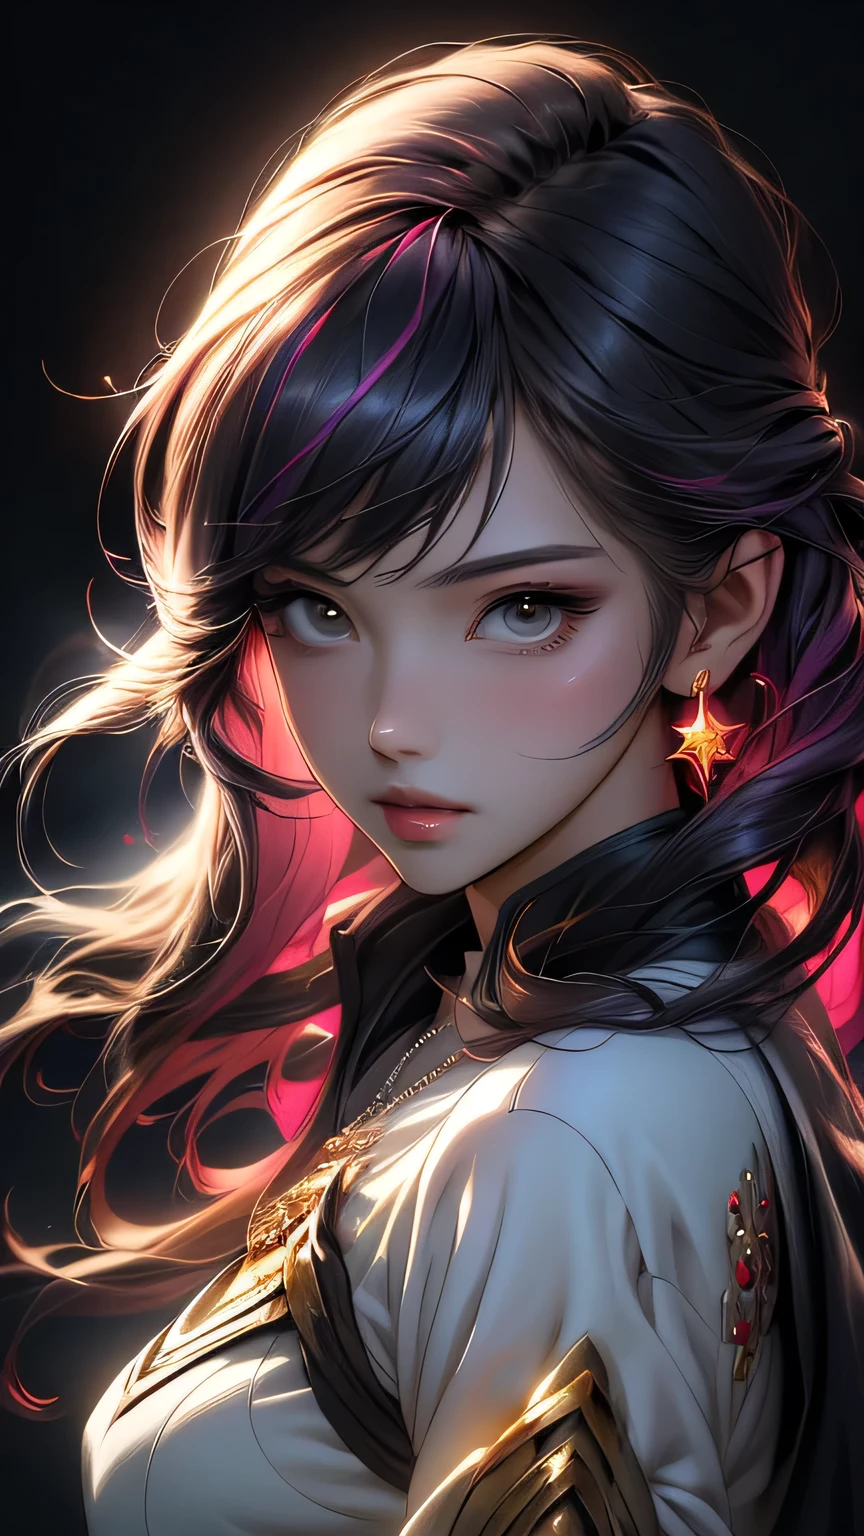 Close-up of a woman with colorful hair and necklace, Anime girl with space-like hair, The gentle vitality of rose roses, Gubes-style artwork, Fantasy art style, colorful], Vivid fantasy style, Ross draws vibrant cartoons, cosmic and colorful, Gwaiz, colorful digital fantasy art, Great art style, Beautiful anime style, Full body lighting, Skin Brightness, Sexy look, (Dynamic pose)､ masterpiece, 最high quality, high quality, High resolution､((Upper body portrait))､Upper body portrait､